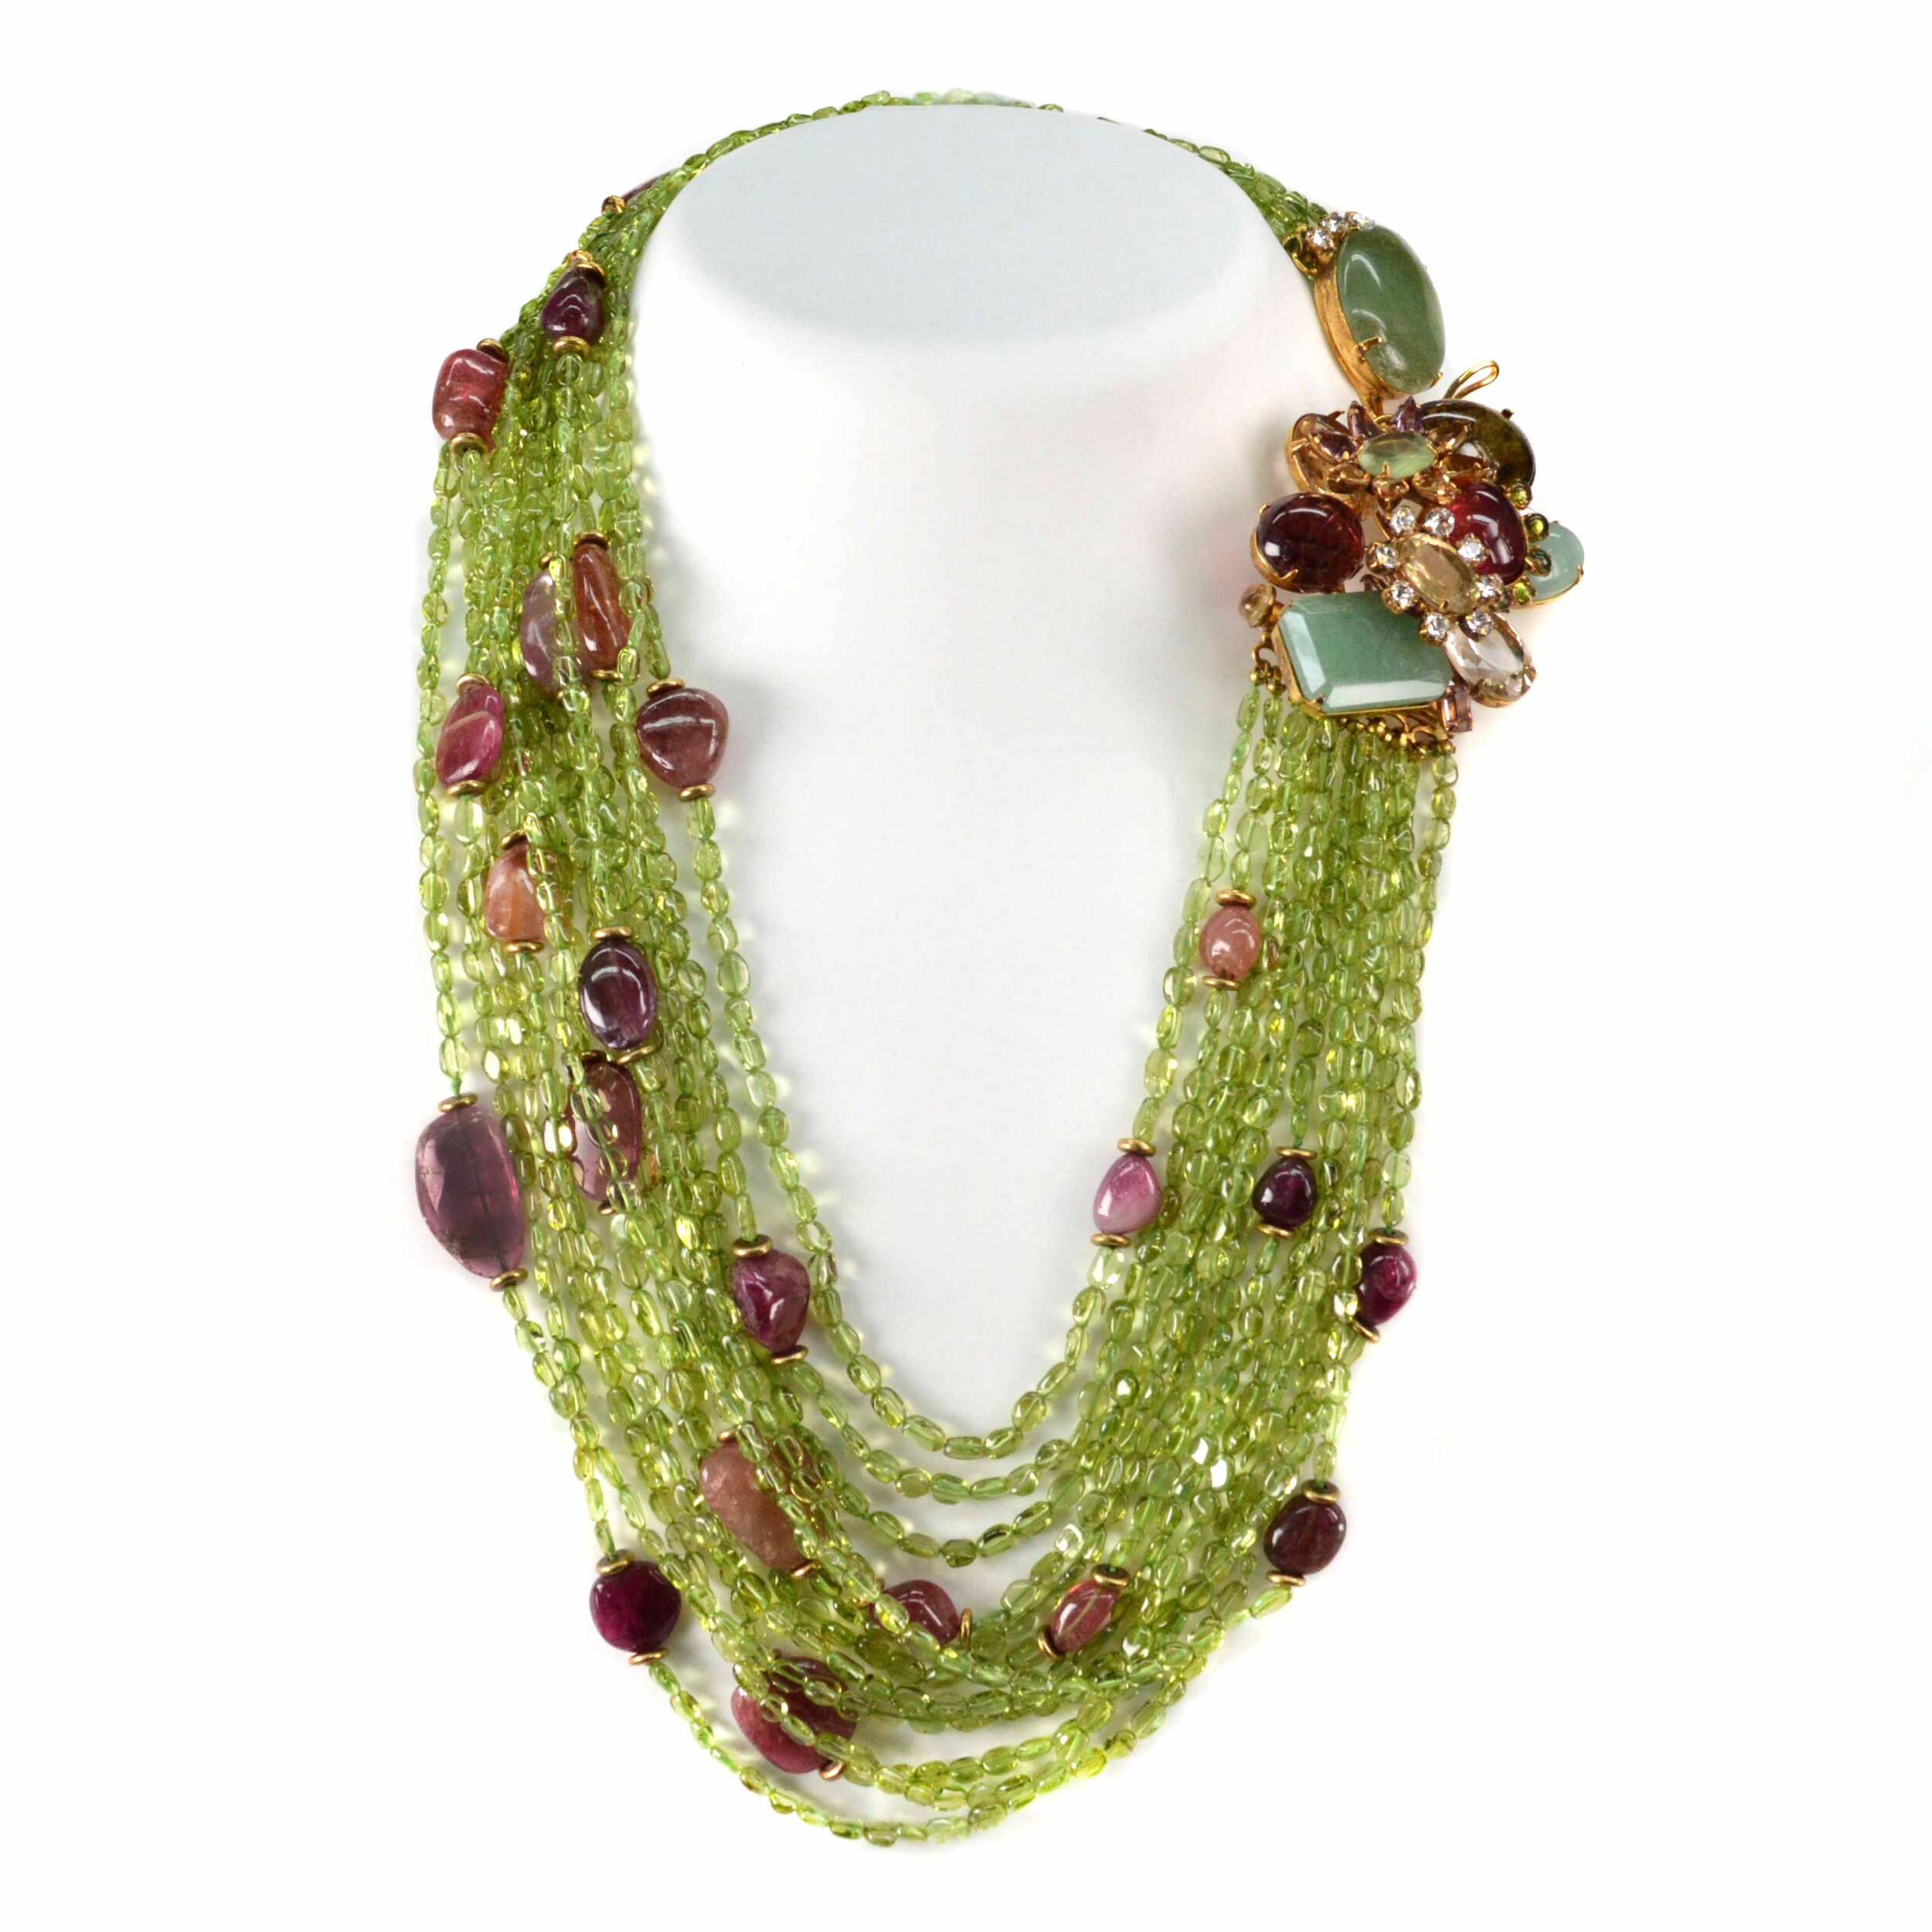 Details about   Faceted 942 Cts Earth Mined Single Strand Tourmaline Beaded Necklace JK 21E292